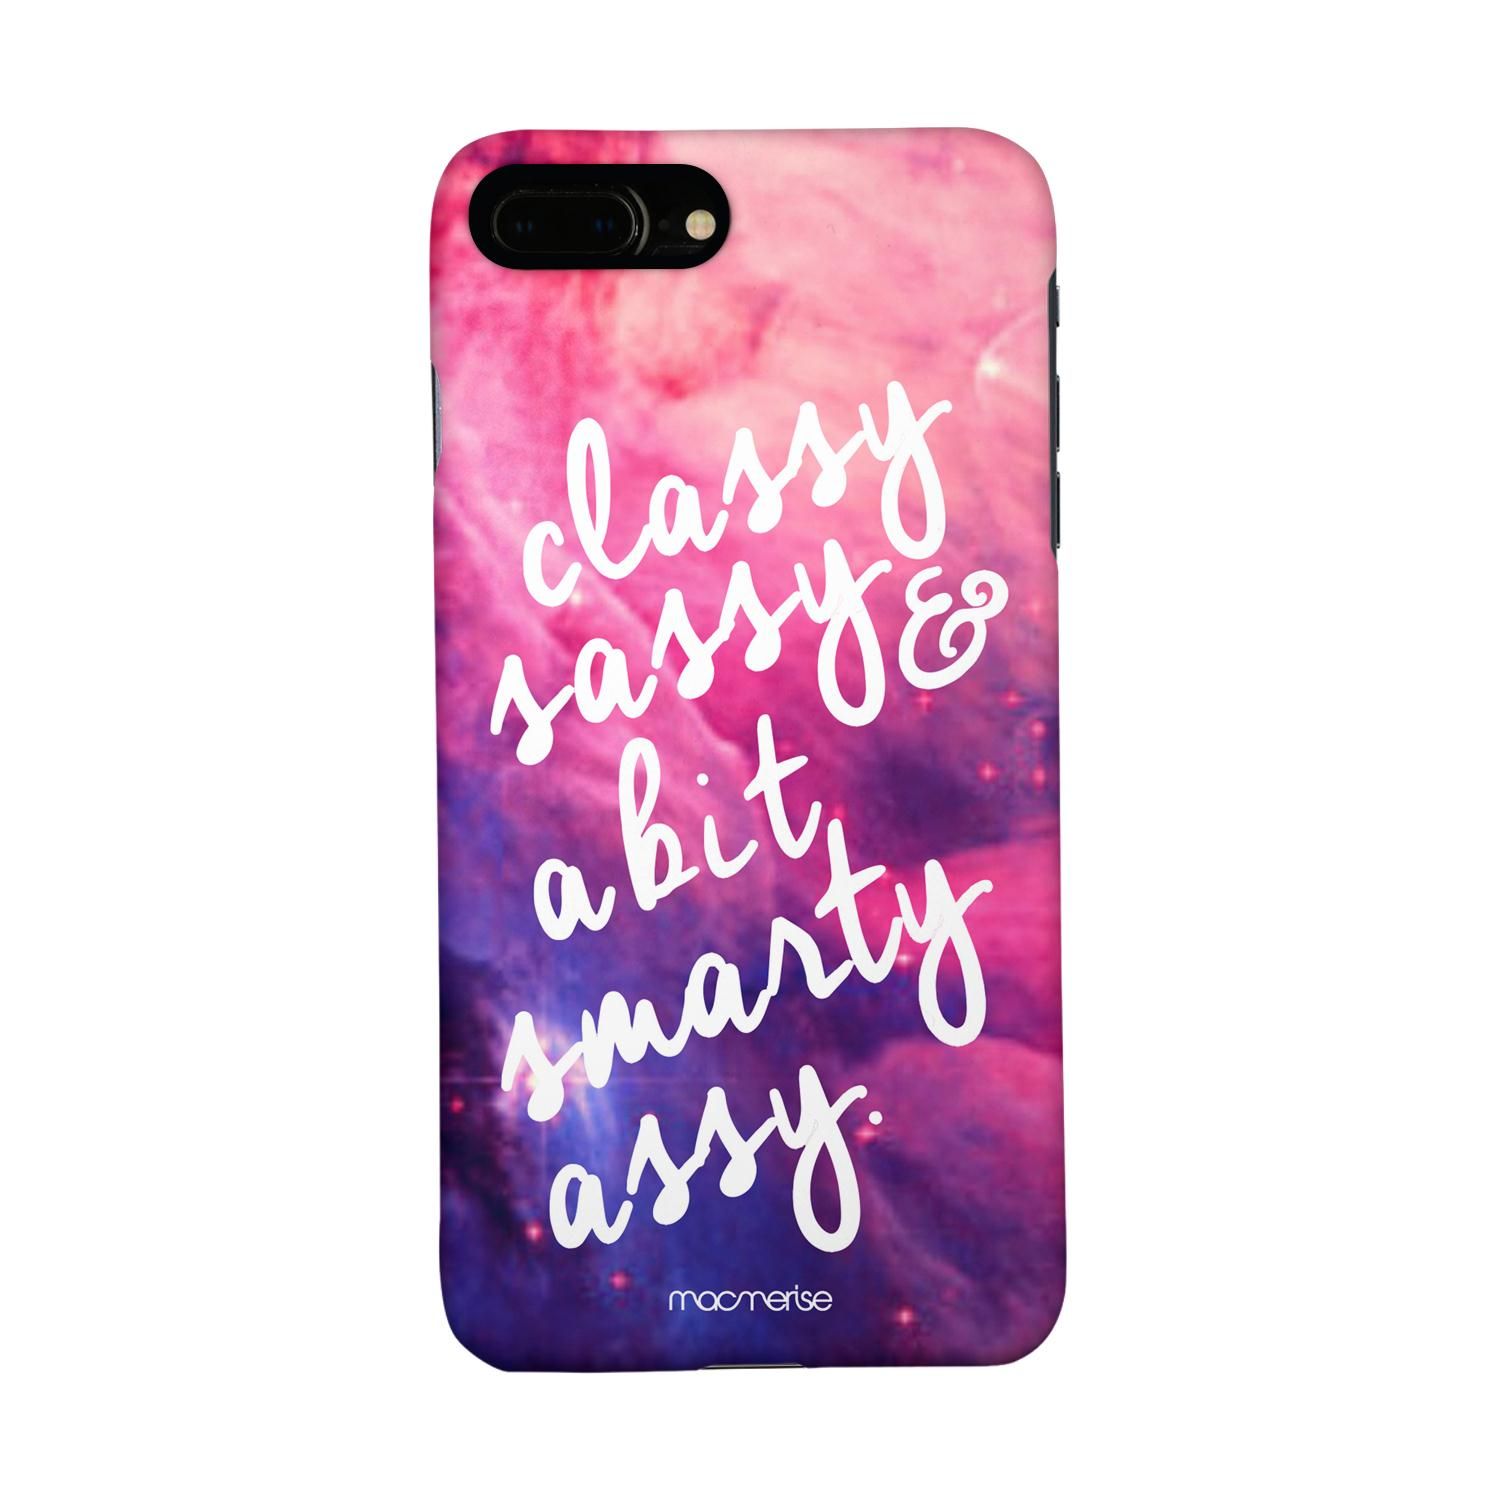 Buy Smarty Assy - Sleek Phone Case for iPhone 7 Plus Online